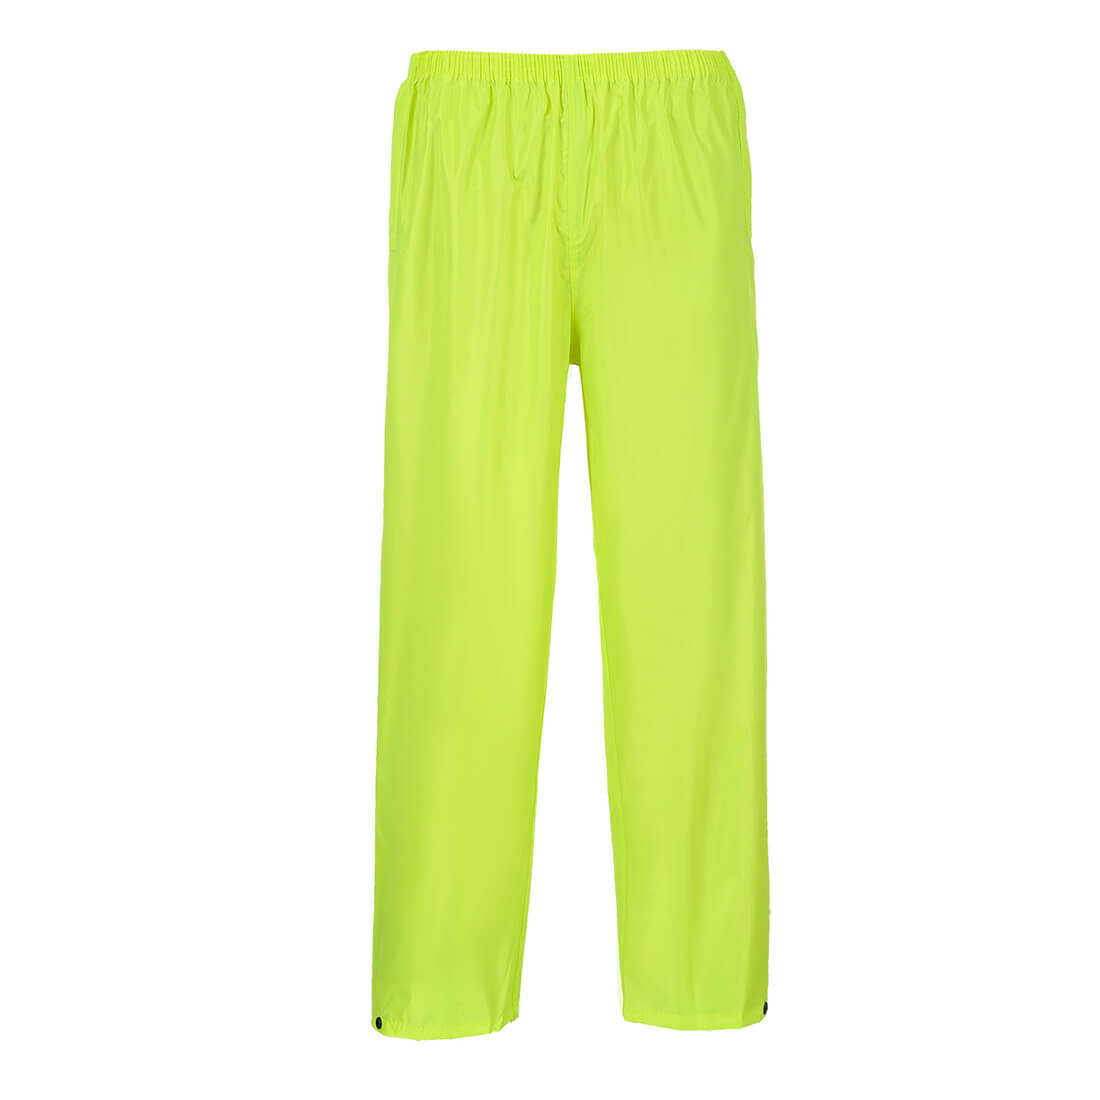 Image of Portwest Classic Rain Trousers Yellow 4XL